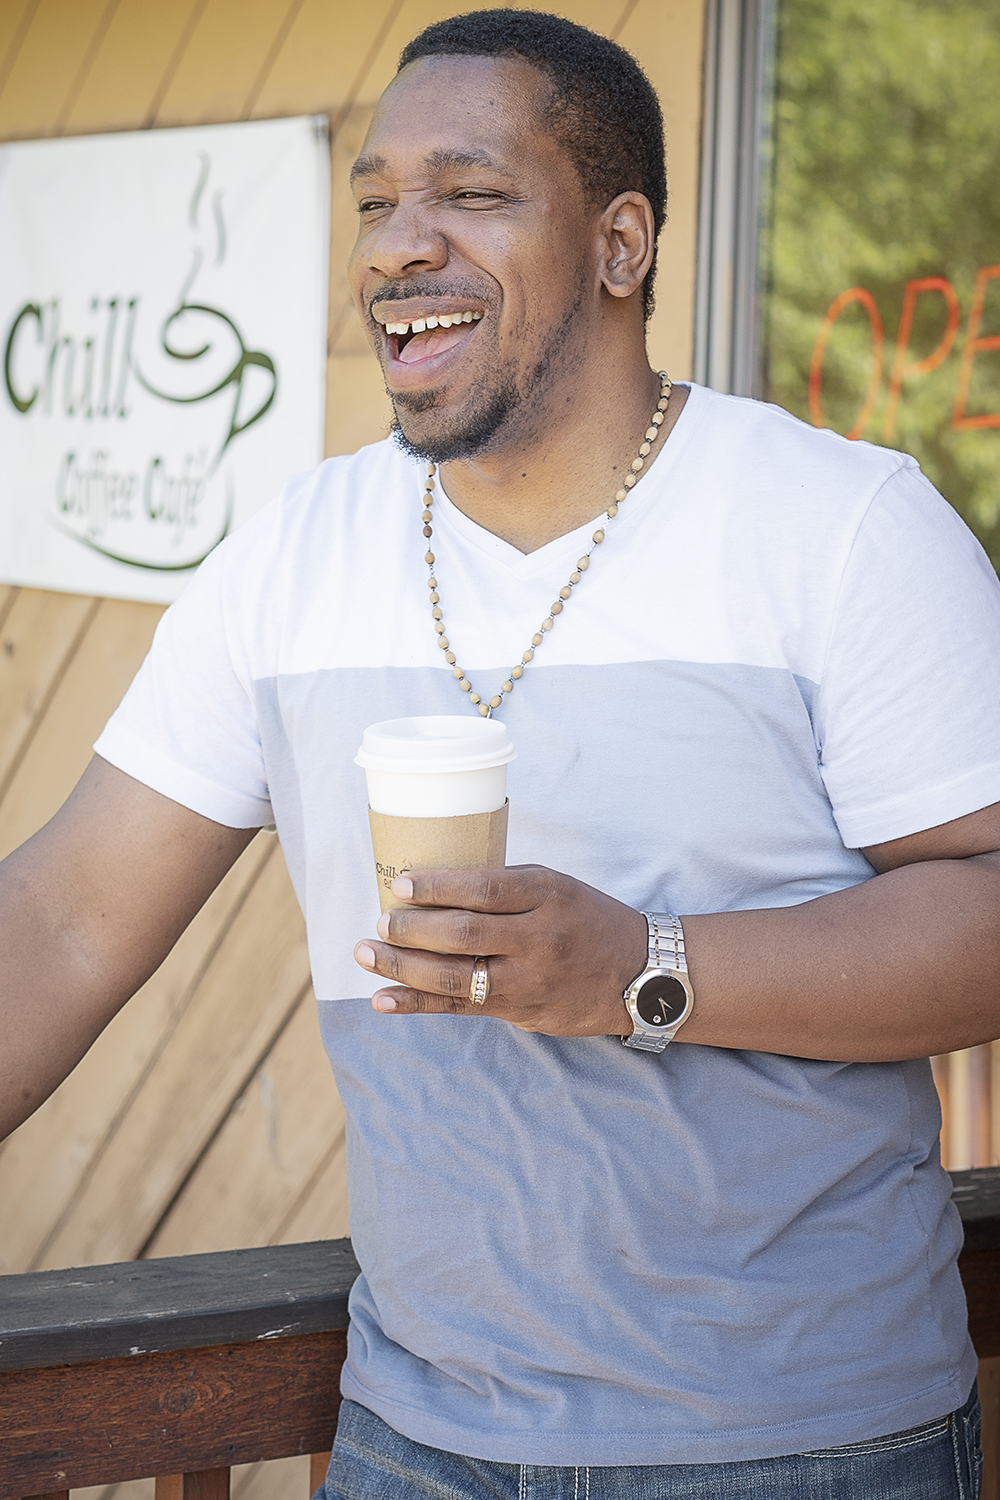 Flint, MI - Friday, June 15, 2018: Owner and pastor, Martez Warren laughs as he drinks a cup of coffee in front of Chill Coffee Cafe.